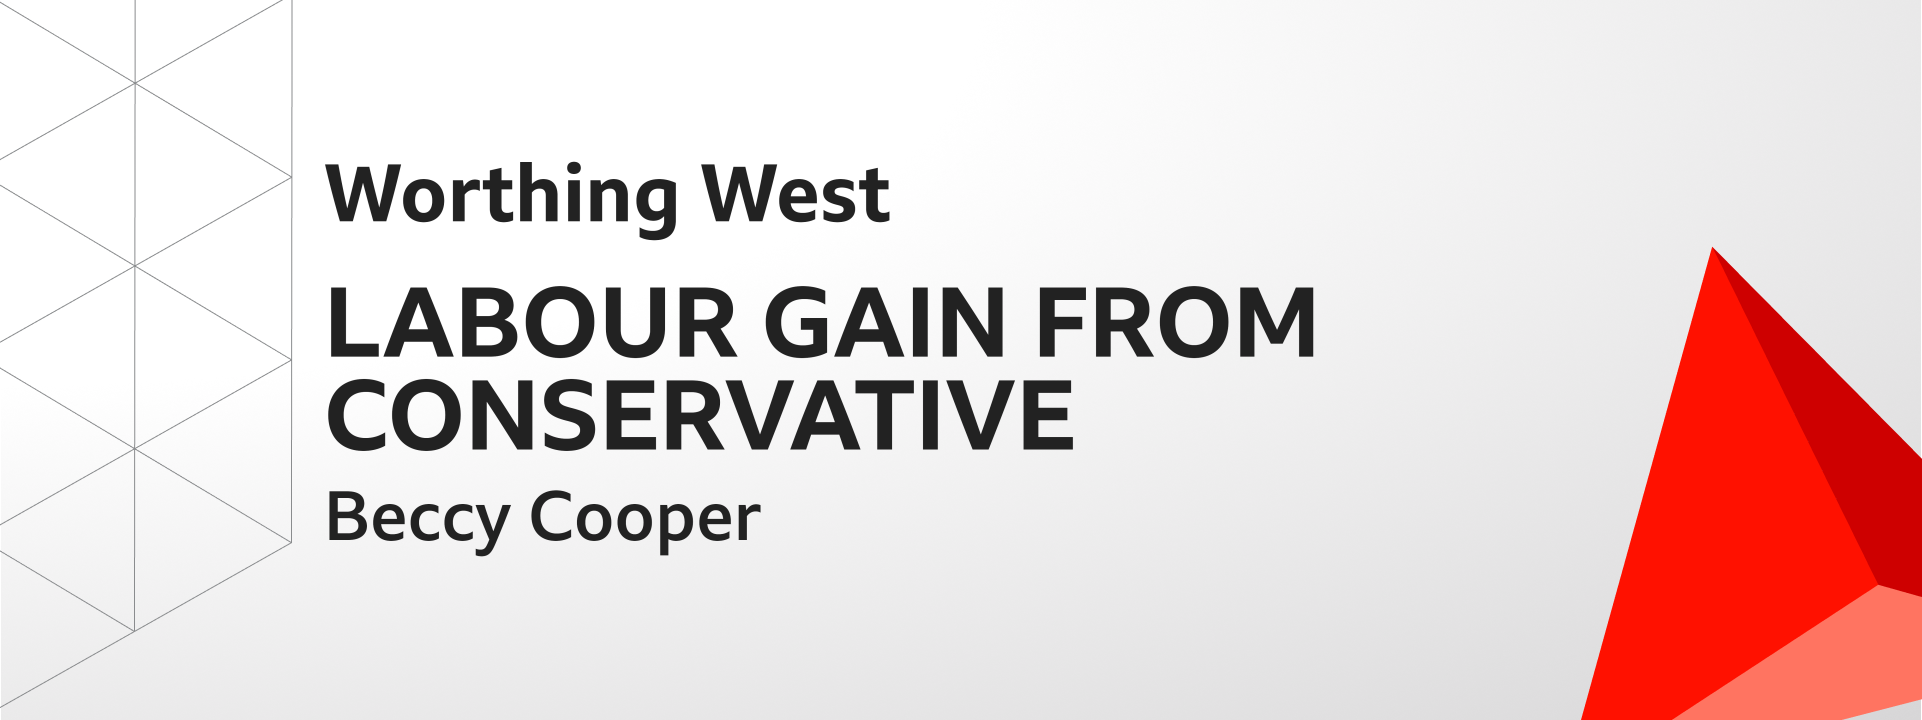 Graphic showing Labour gains Worthing West from the Conservatives. The winning candidate was Beccy Cooper.